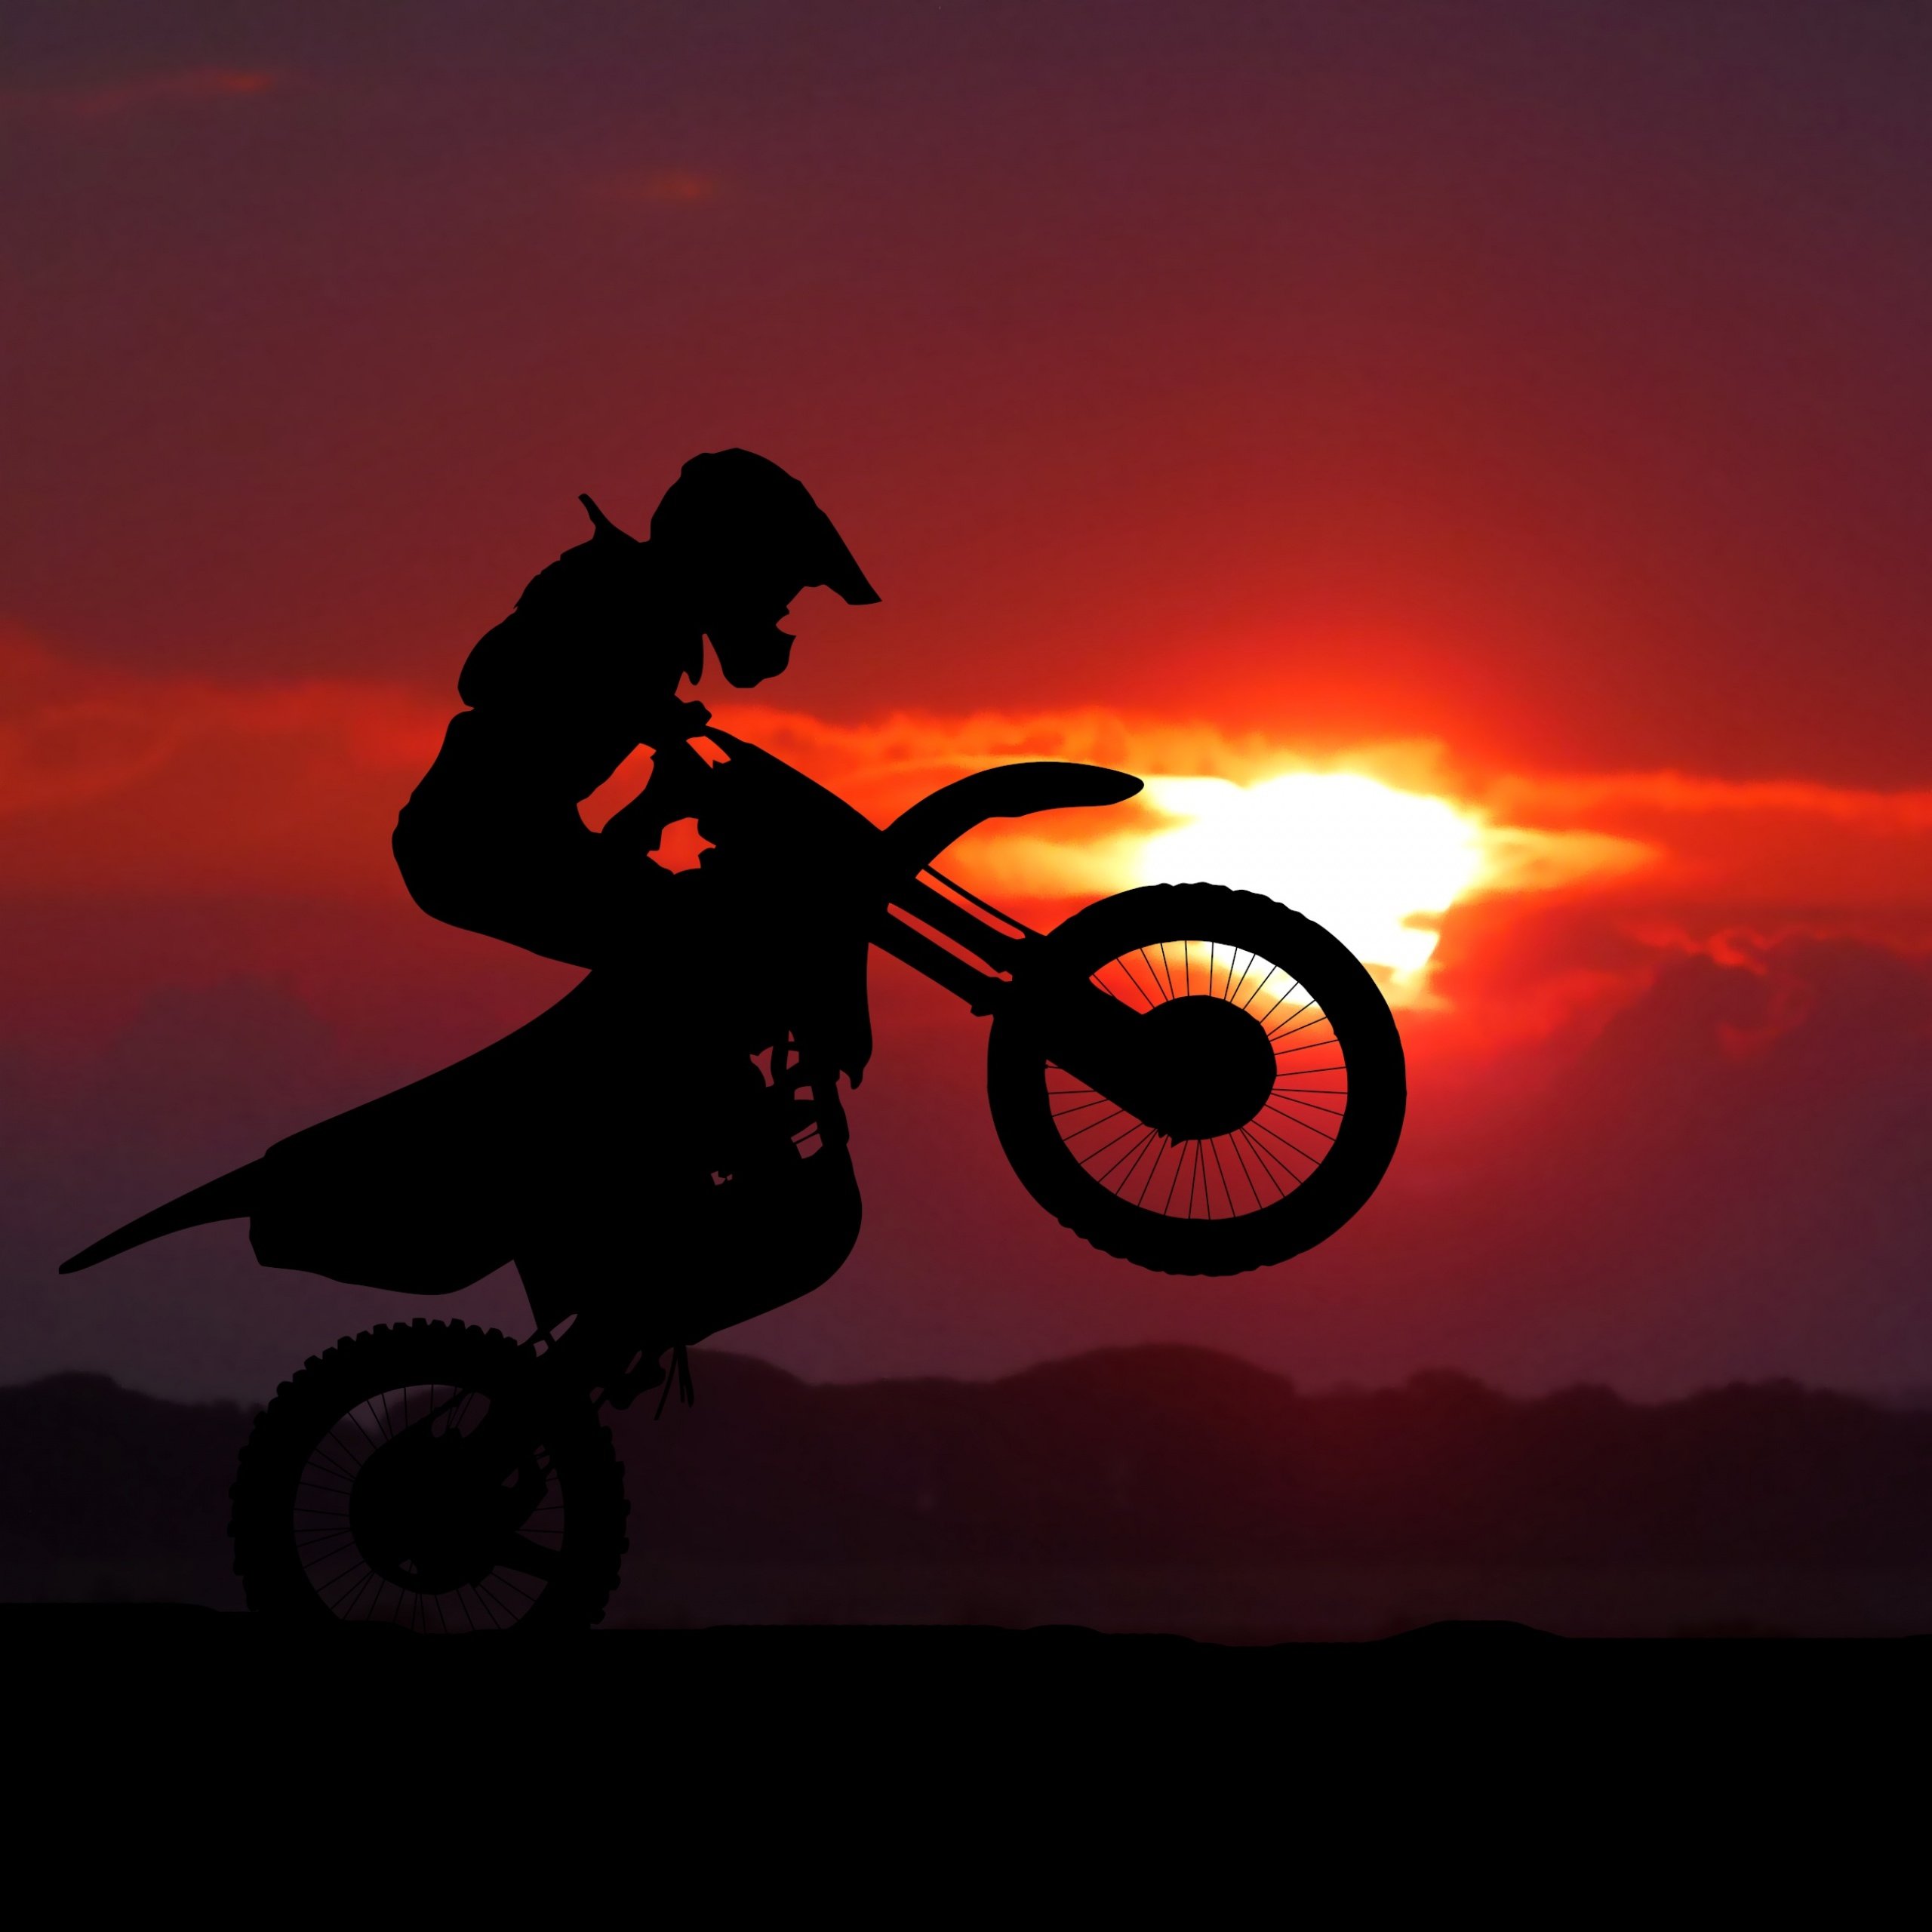 Motocross Motorcycle Wallpaper 4K, Motorcycle stunt, Silhouette, Sunset, Photography